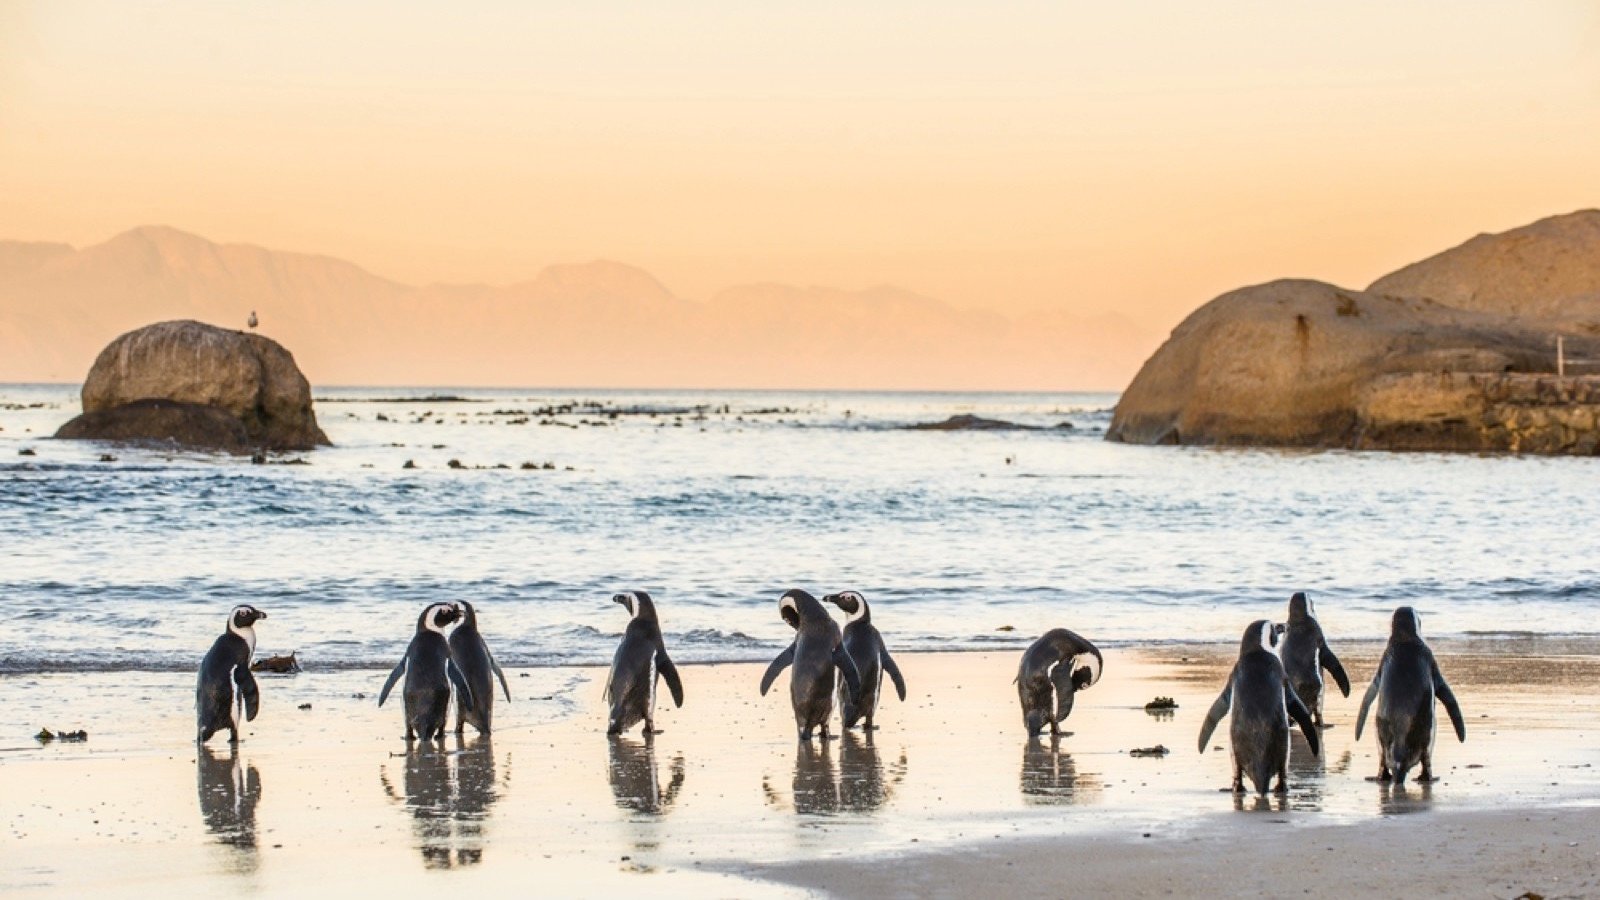 <p>If you love penguins, head to Boulders Beach, Cape Town, to spend time with these cute, quirky, flightless seabirds. Because of the location’s popularity, the penguins have become used to people being around, so you can get quite close to them.</p><p>Boulders Beach is within the Table Mountain National Park Marine Protected Area, meaning the penguins are protected, and the beaches are clean and safe.</p>